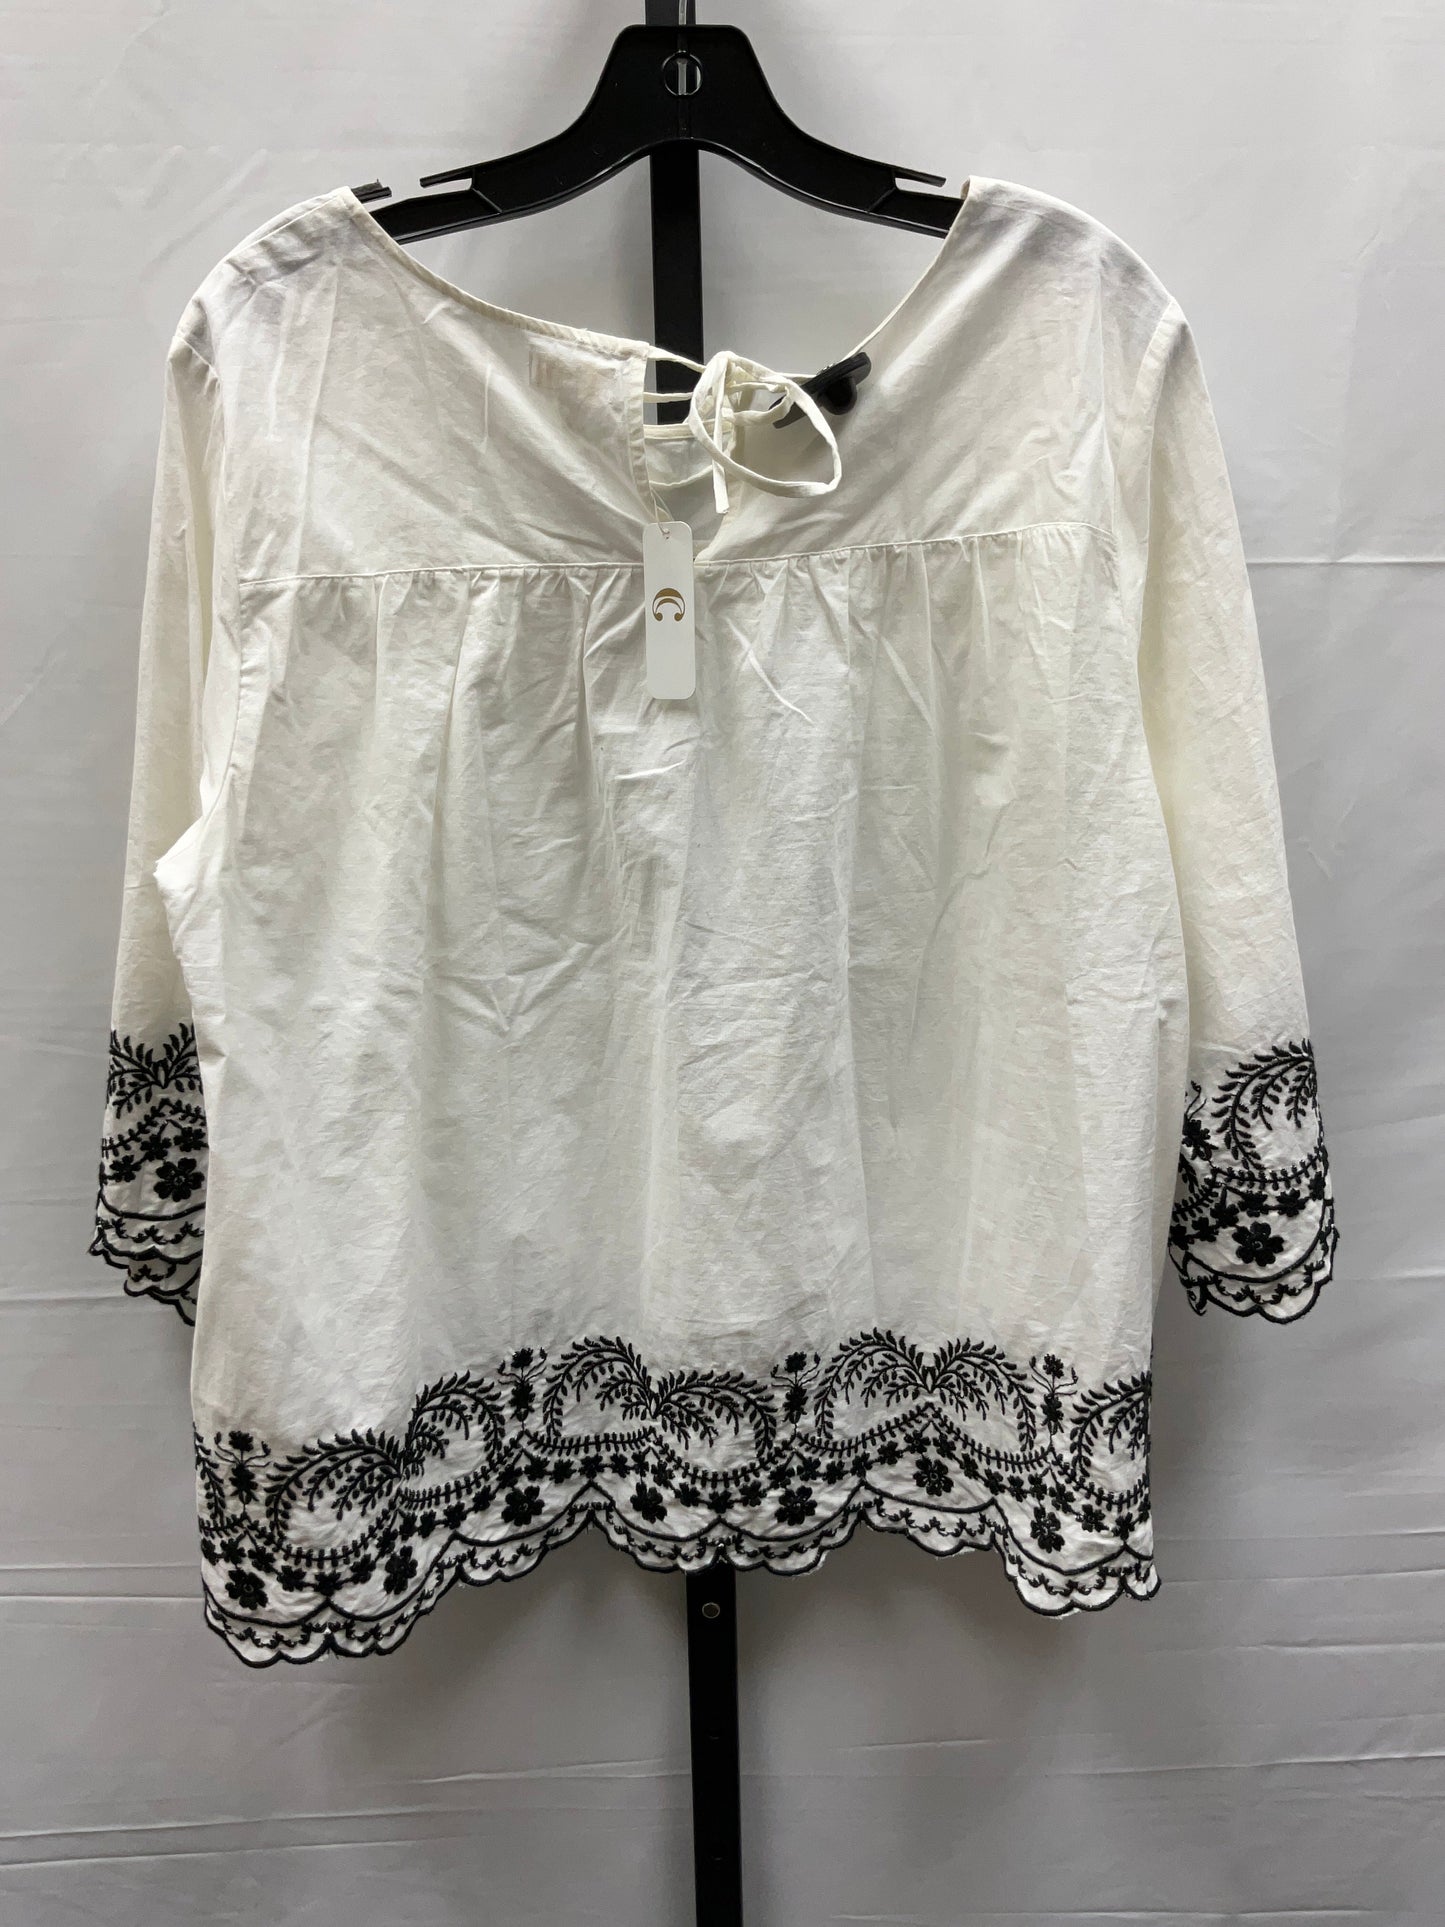 Black & White Top Long Sleeve Charming Charlie, Size L